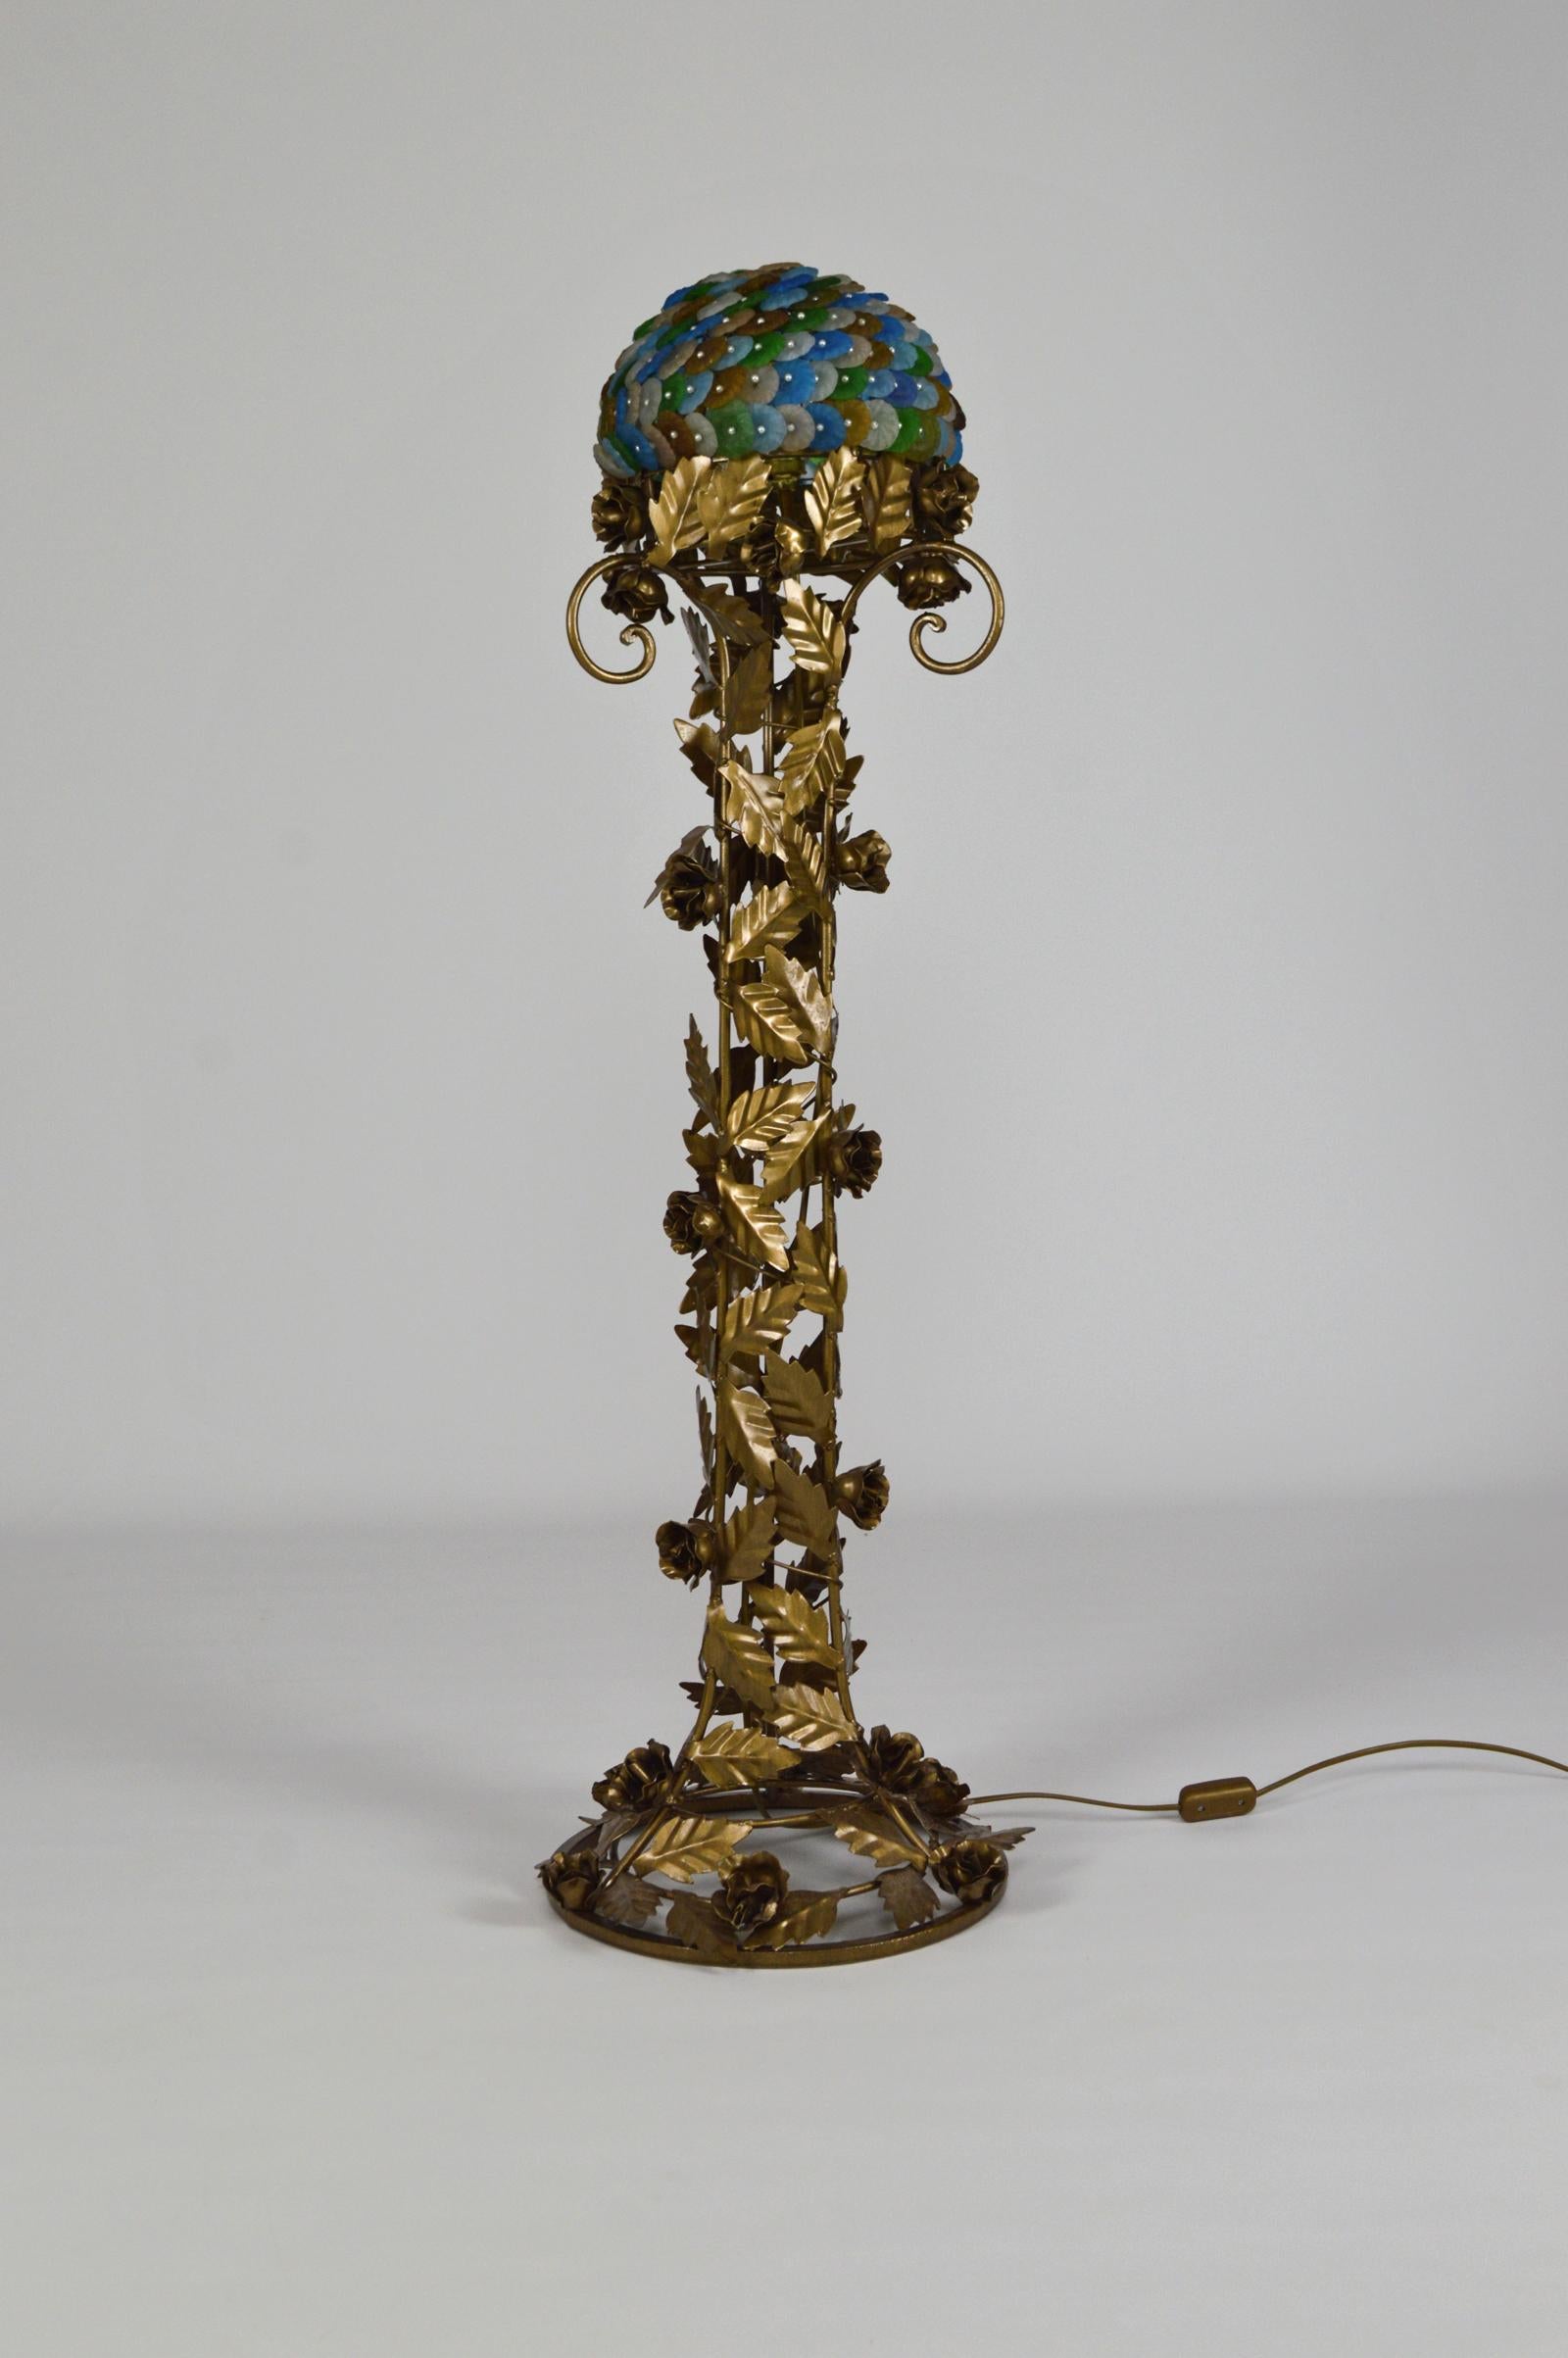 French Floral Art Deco Floor Lamp in Gilded Wrought Iron & Glass Flowers, circa 1930 For Sale